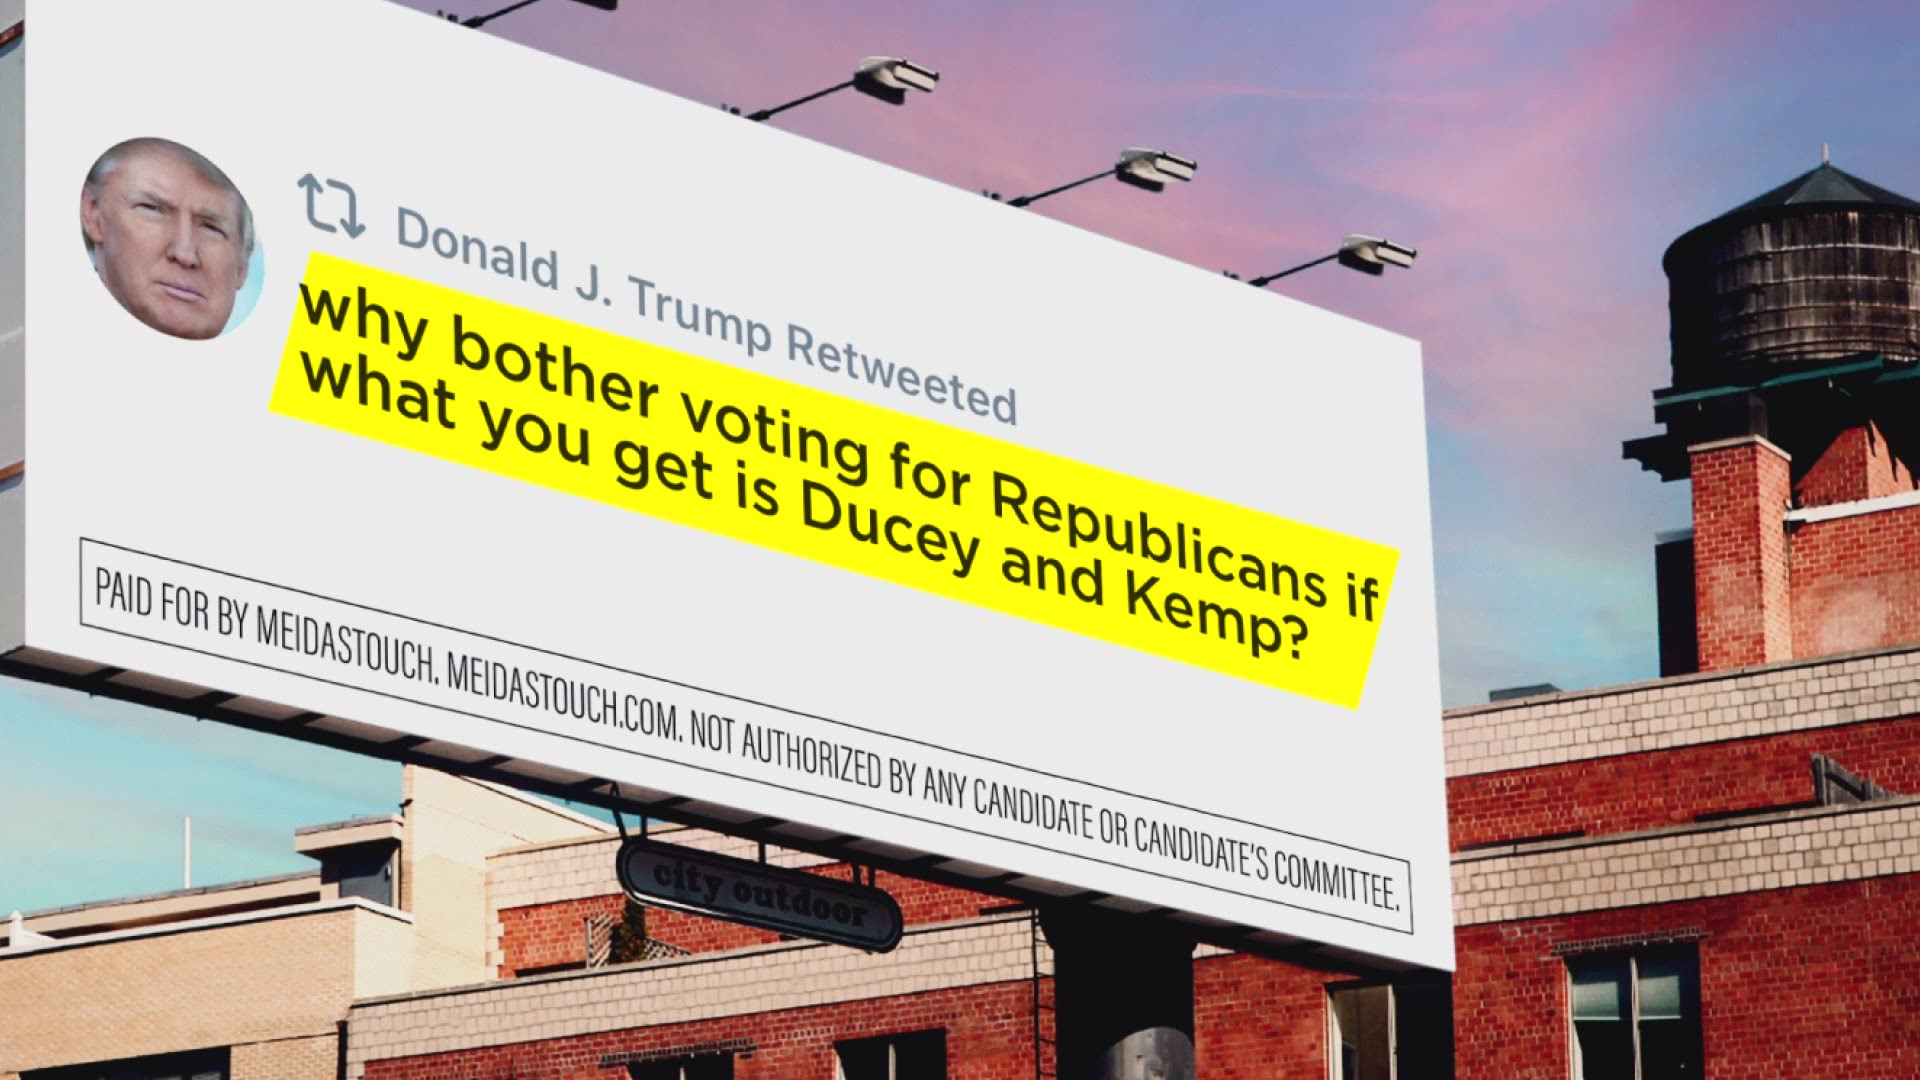 Billboards in Georgia are invoking Gov. Ducey as a warning to voters that Republicans can't be trusted. It's also a comment on the ongoing turmoil within the GOP.